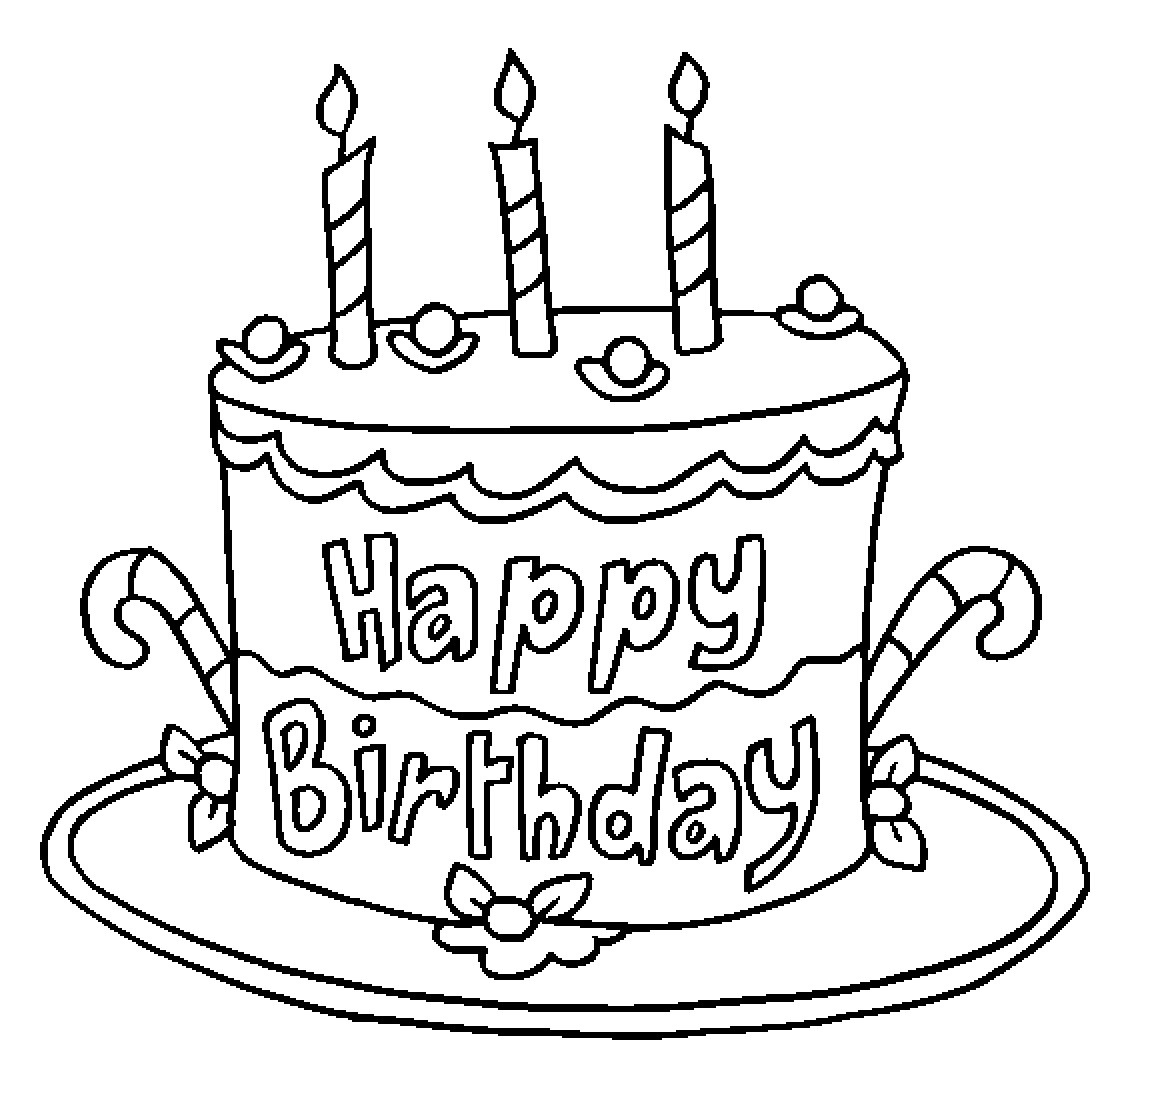 How To Draw A Birthday Cake
 Birthday cake slice drawing images and clip art